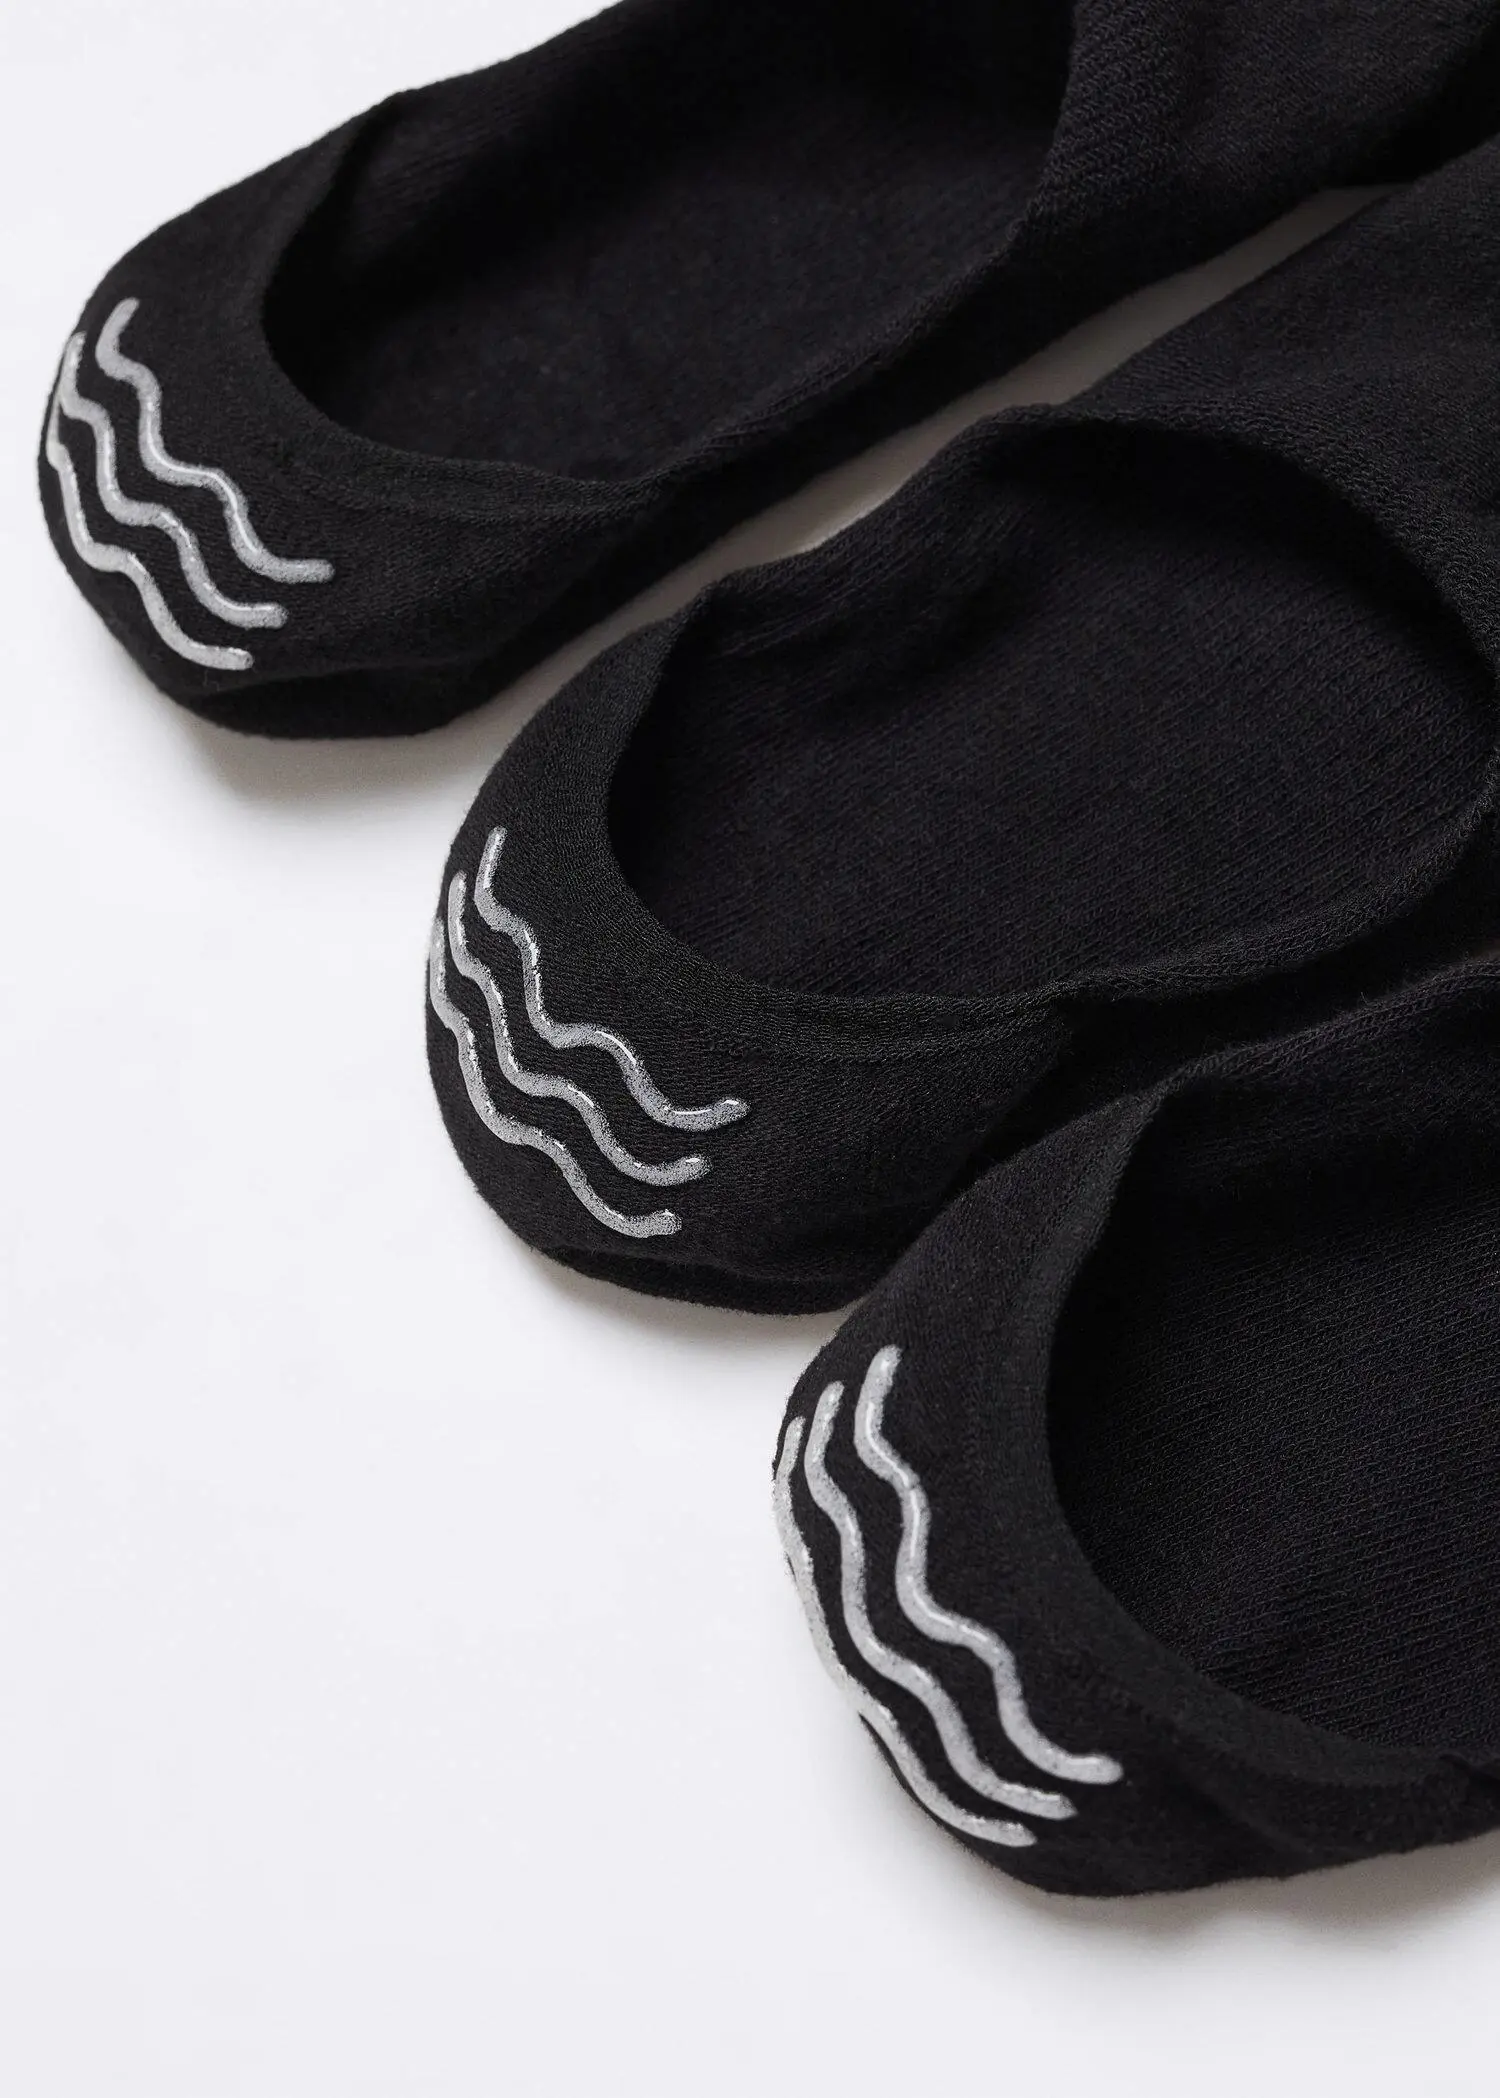 Mango 3-pack of invisible socks. three pairs of black shoes on top of a white surface. 